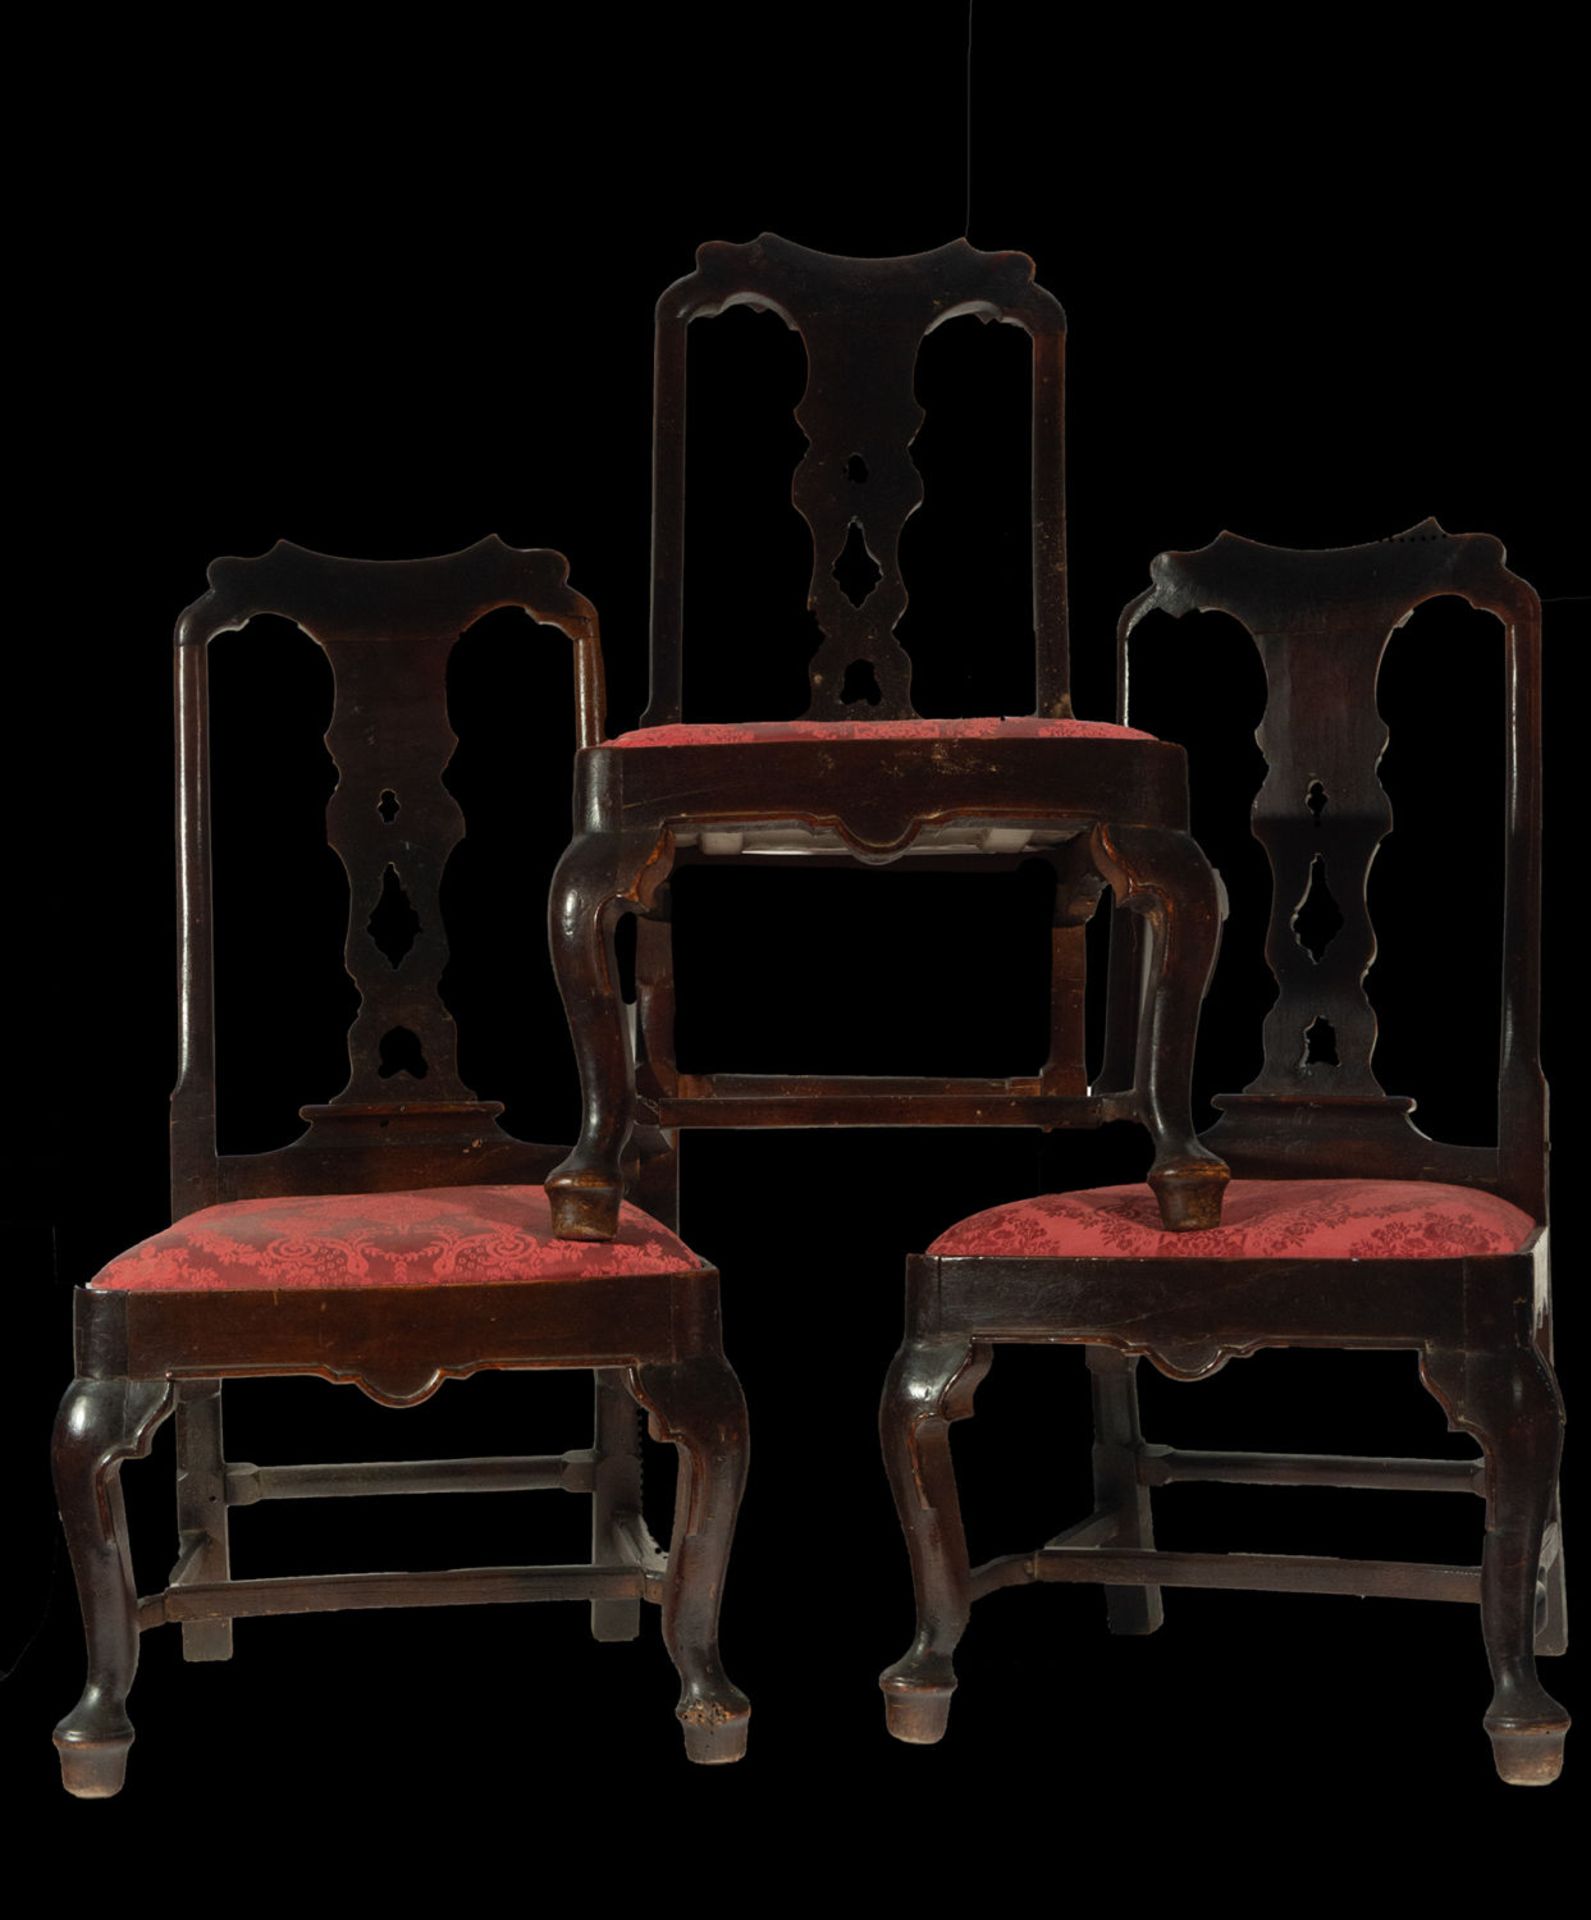 Lot of three English chairs in solid mahogany Queen Anne style, 18th century